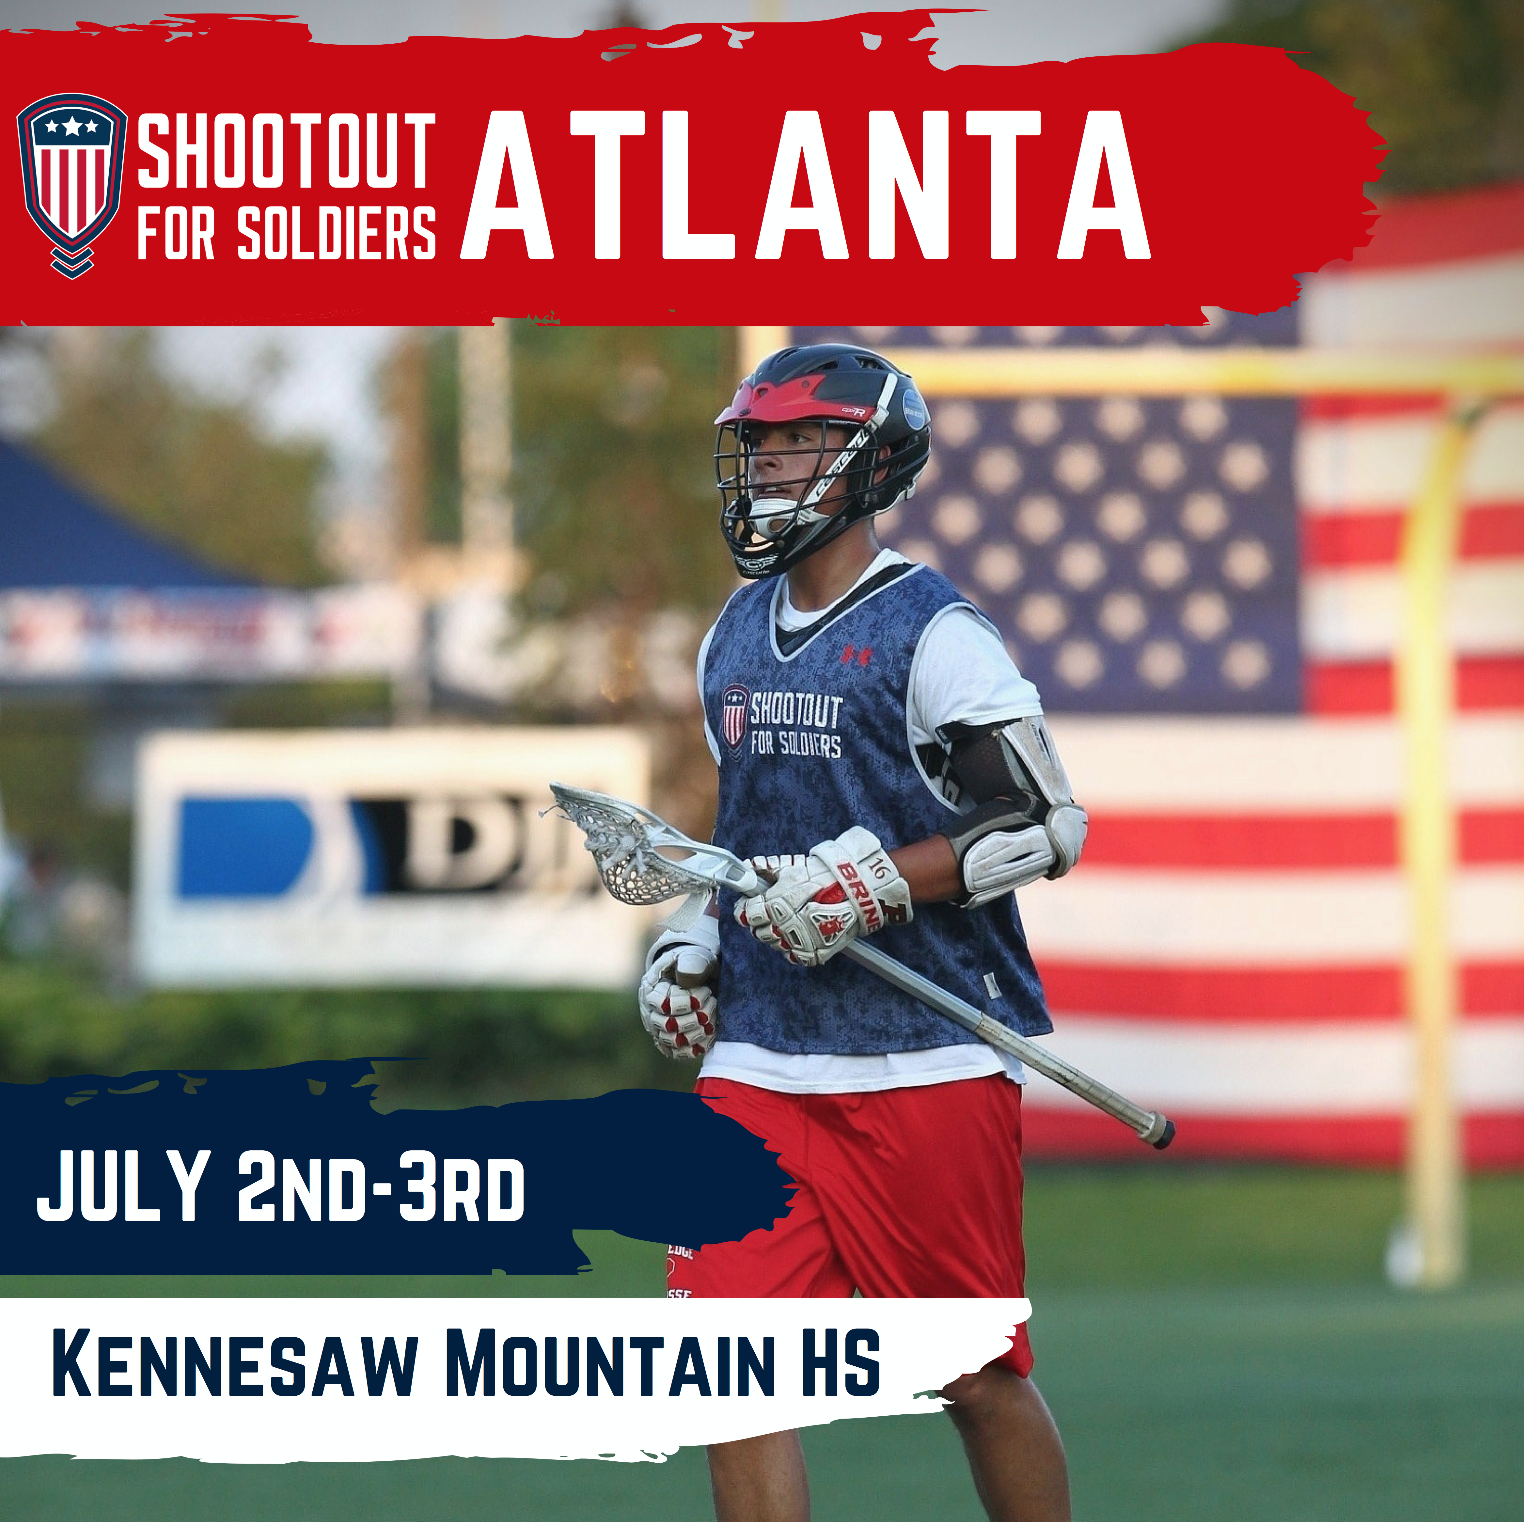 Shootout for Soldiers Atlanta: Official Press Release